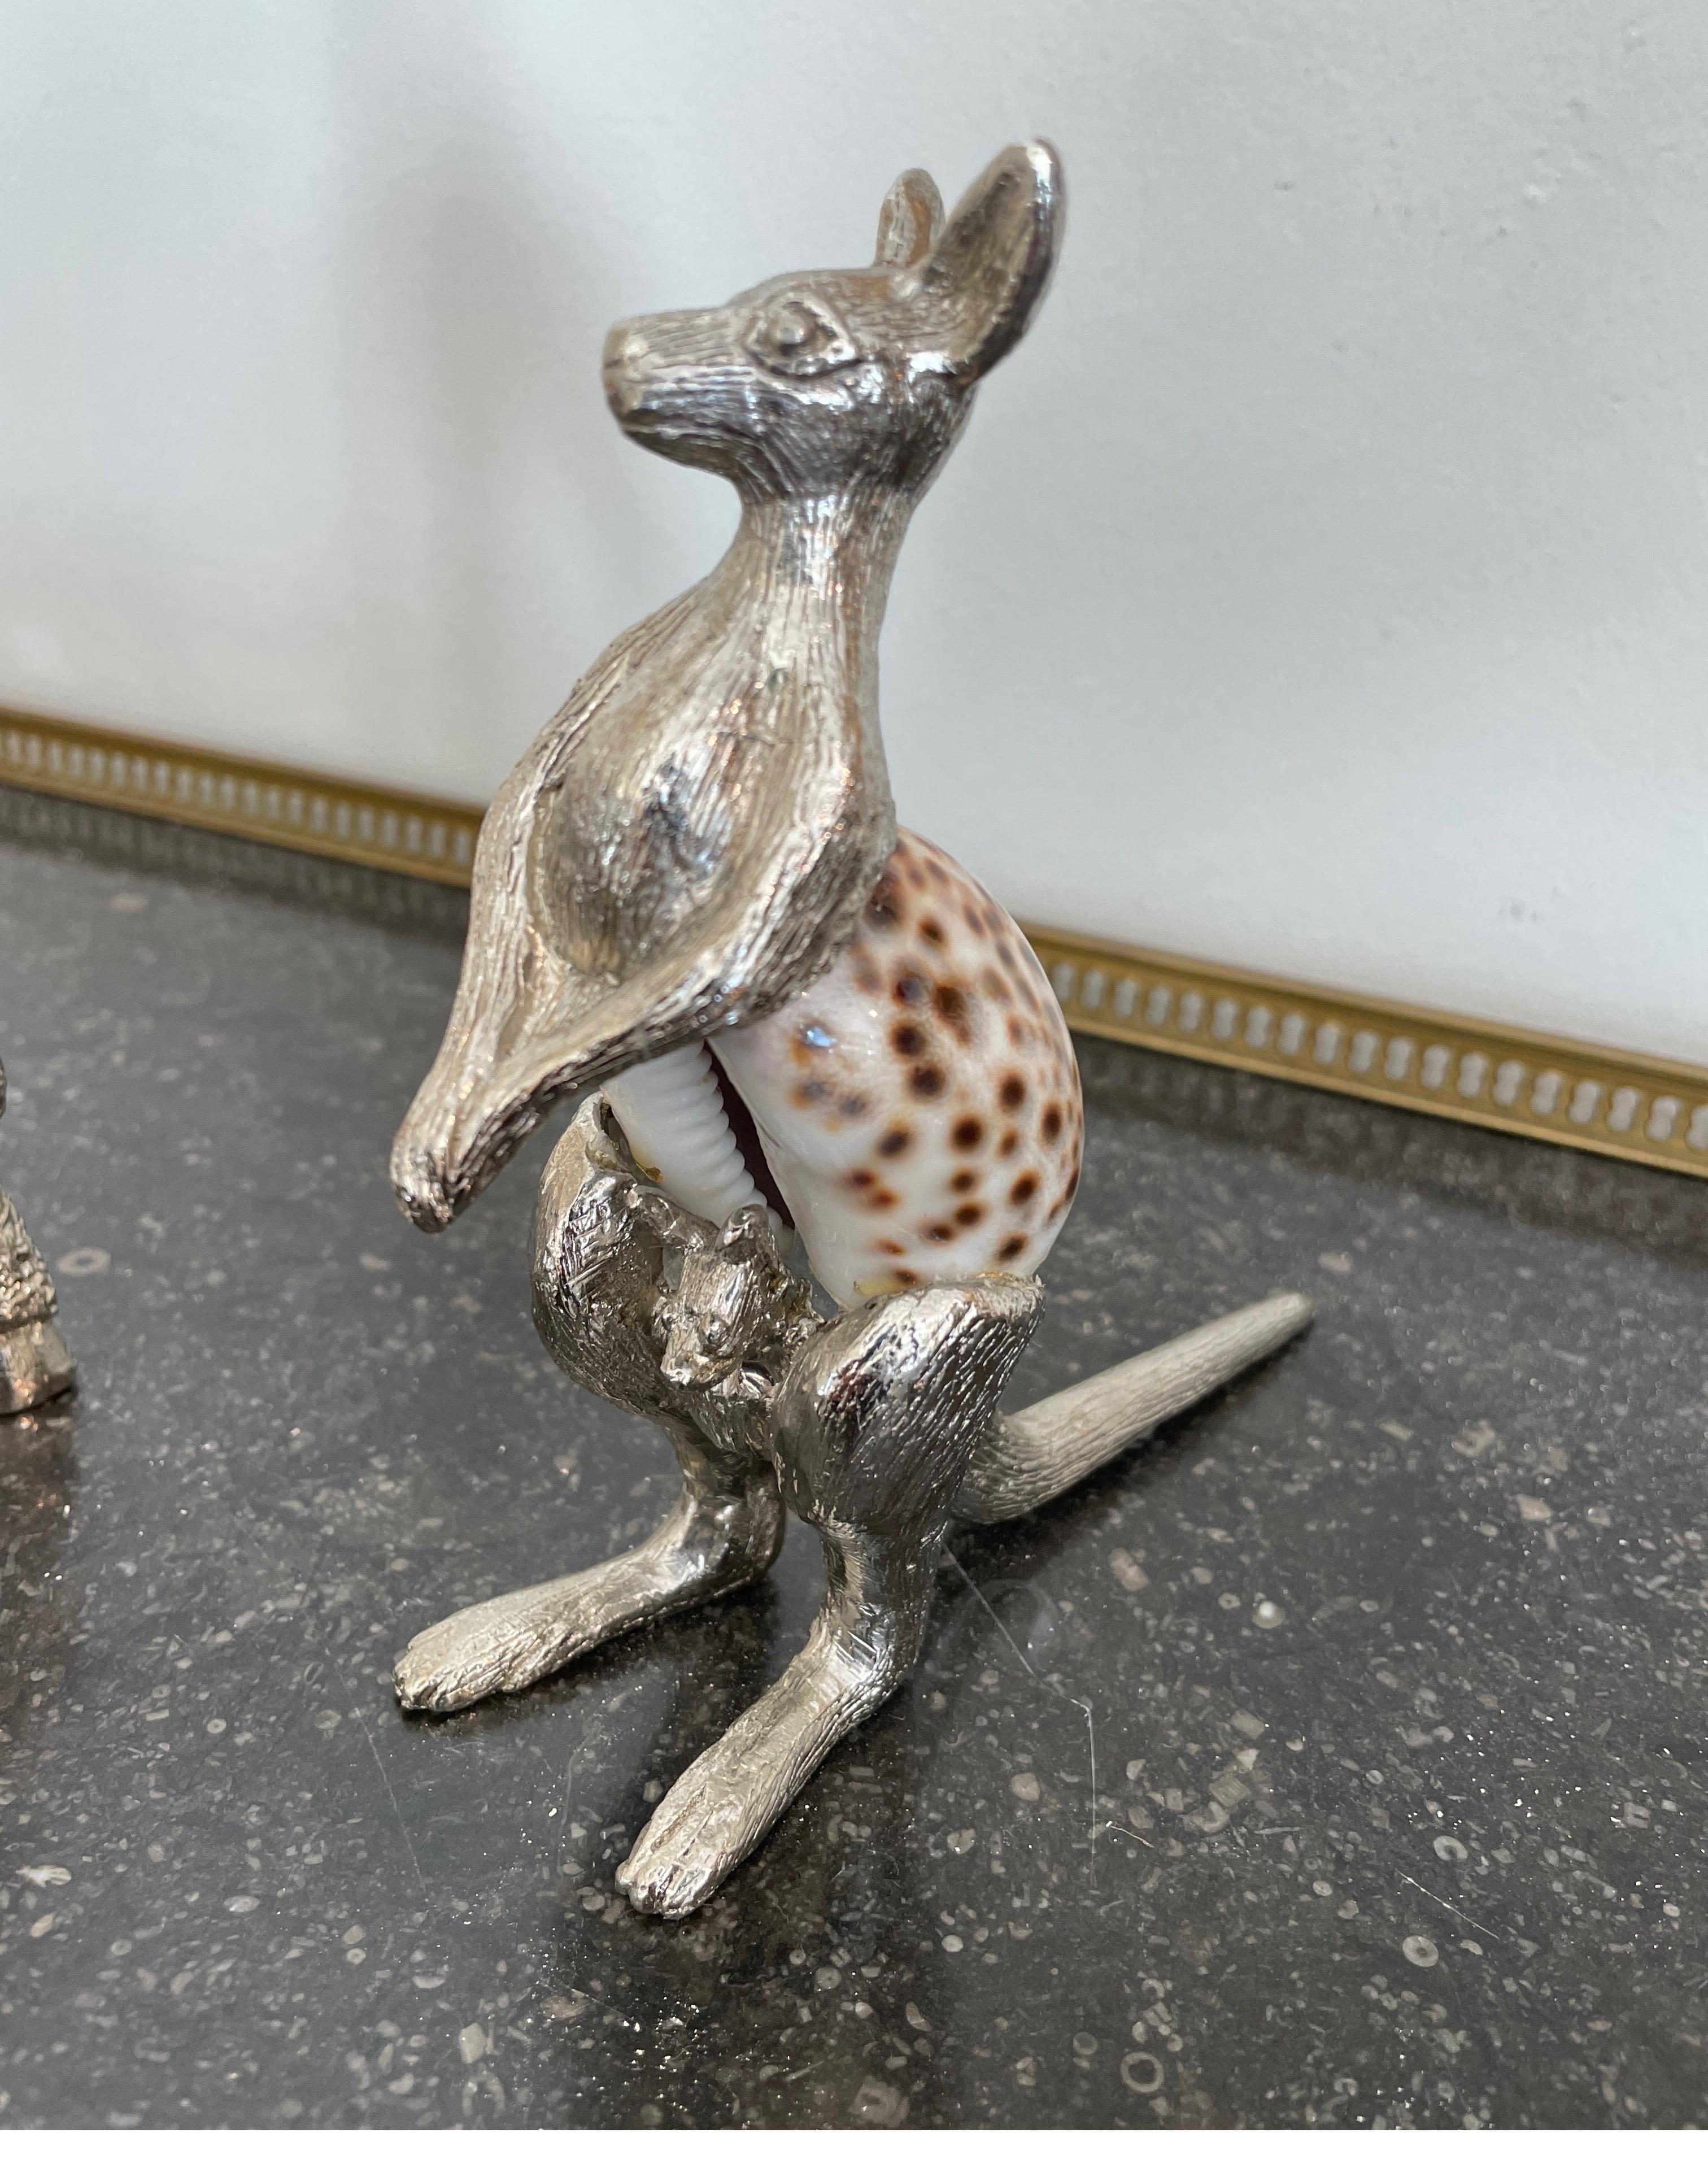 Pair of silver plate figurines of a Giraffe & Kangaroo with shell bodies.